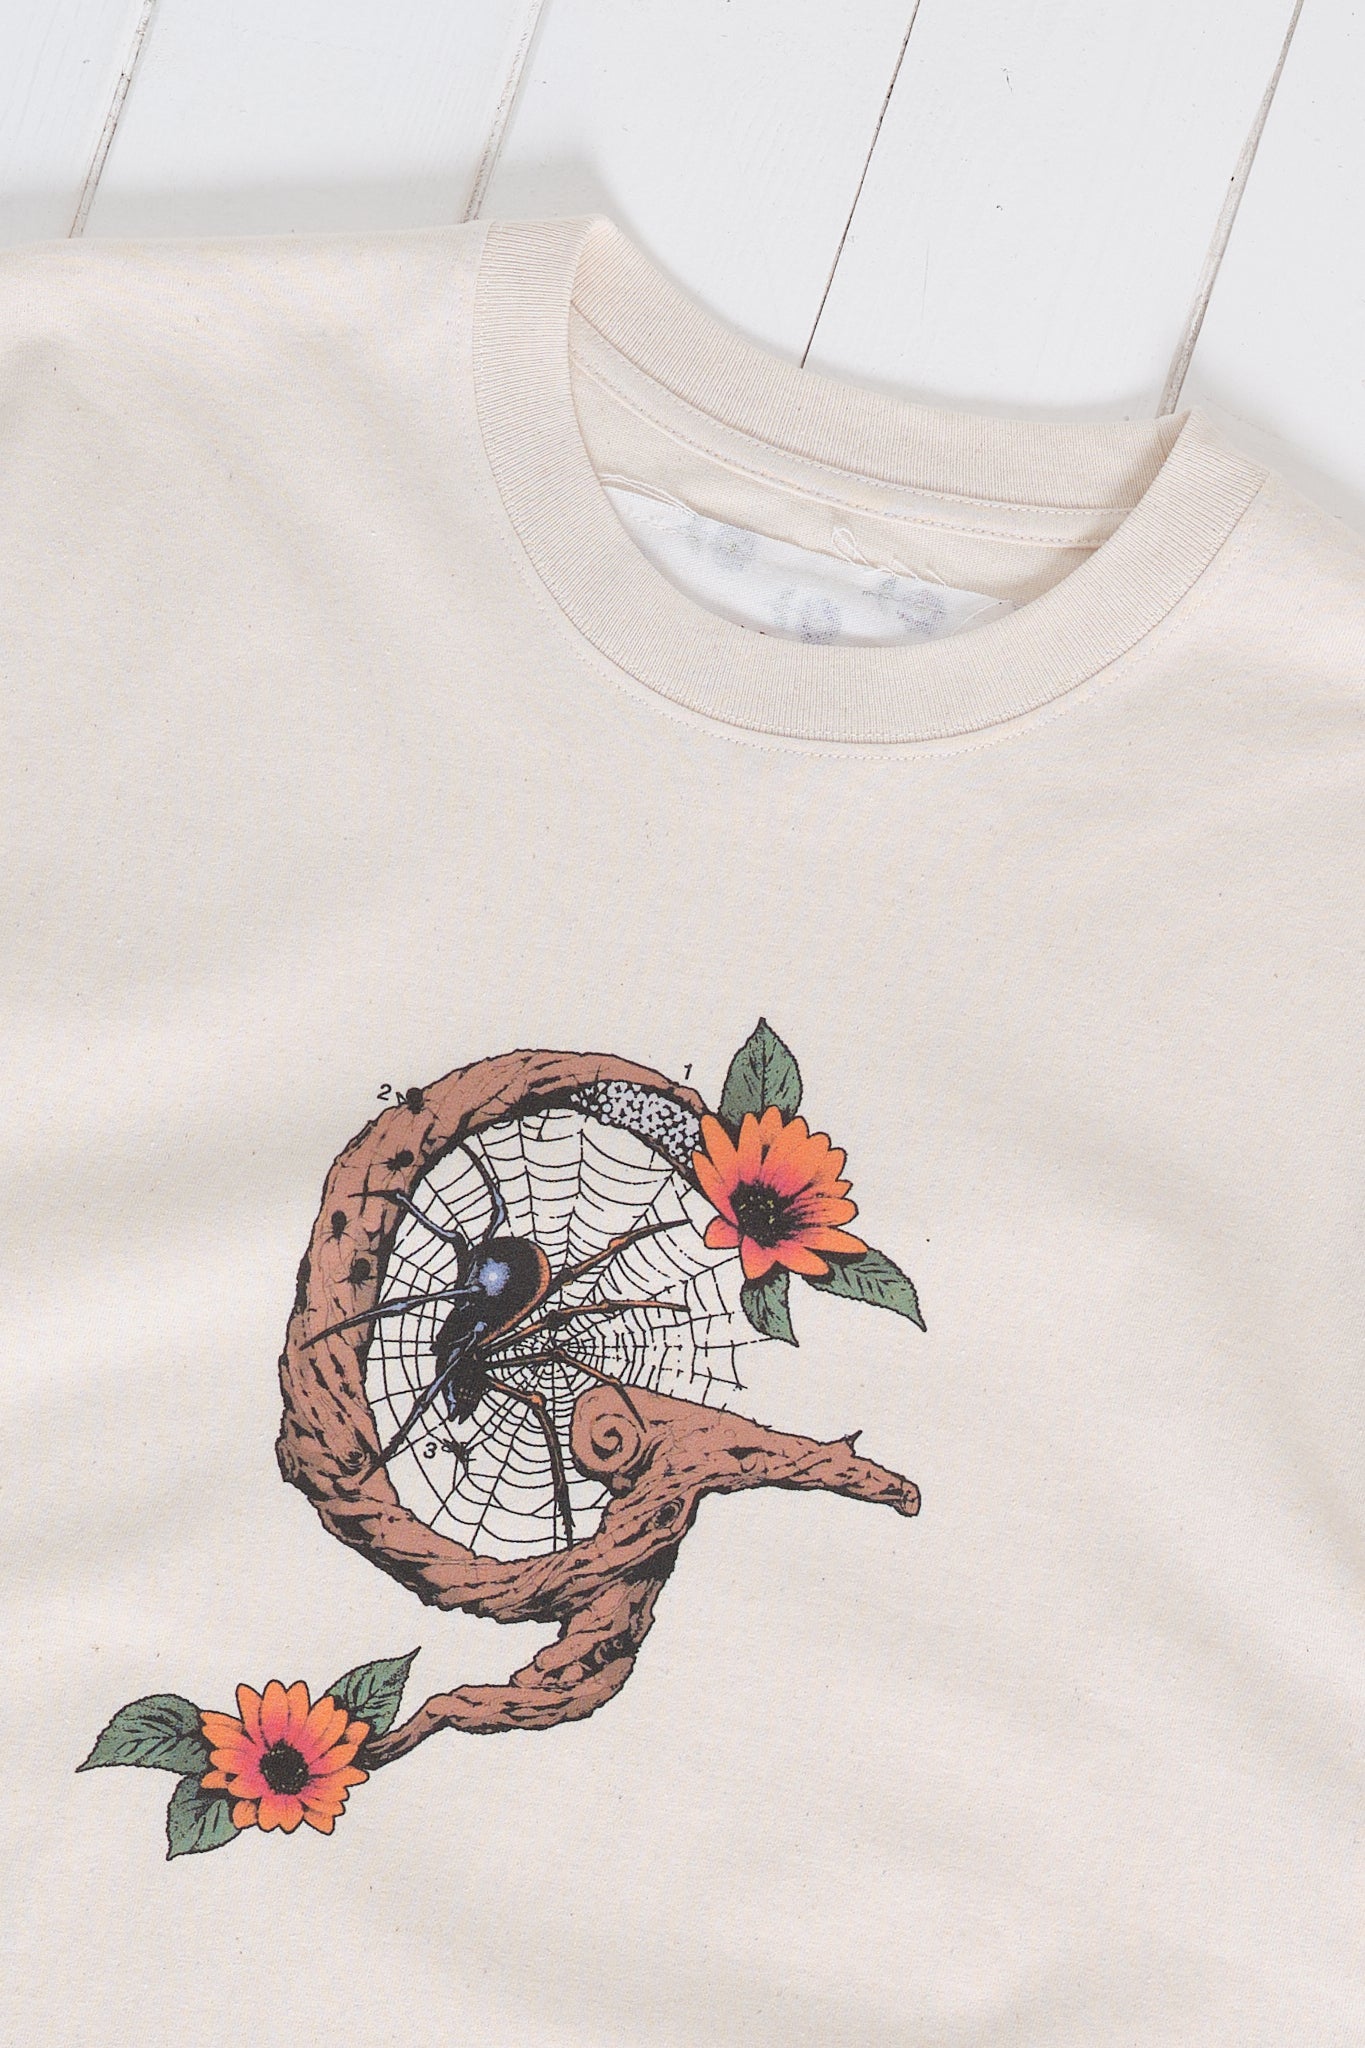 Recycled Cotton SS Tee - Oatmeal G Spider